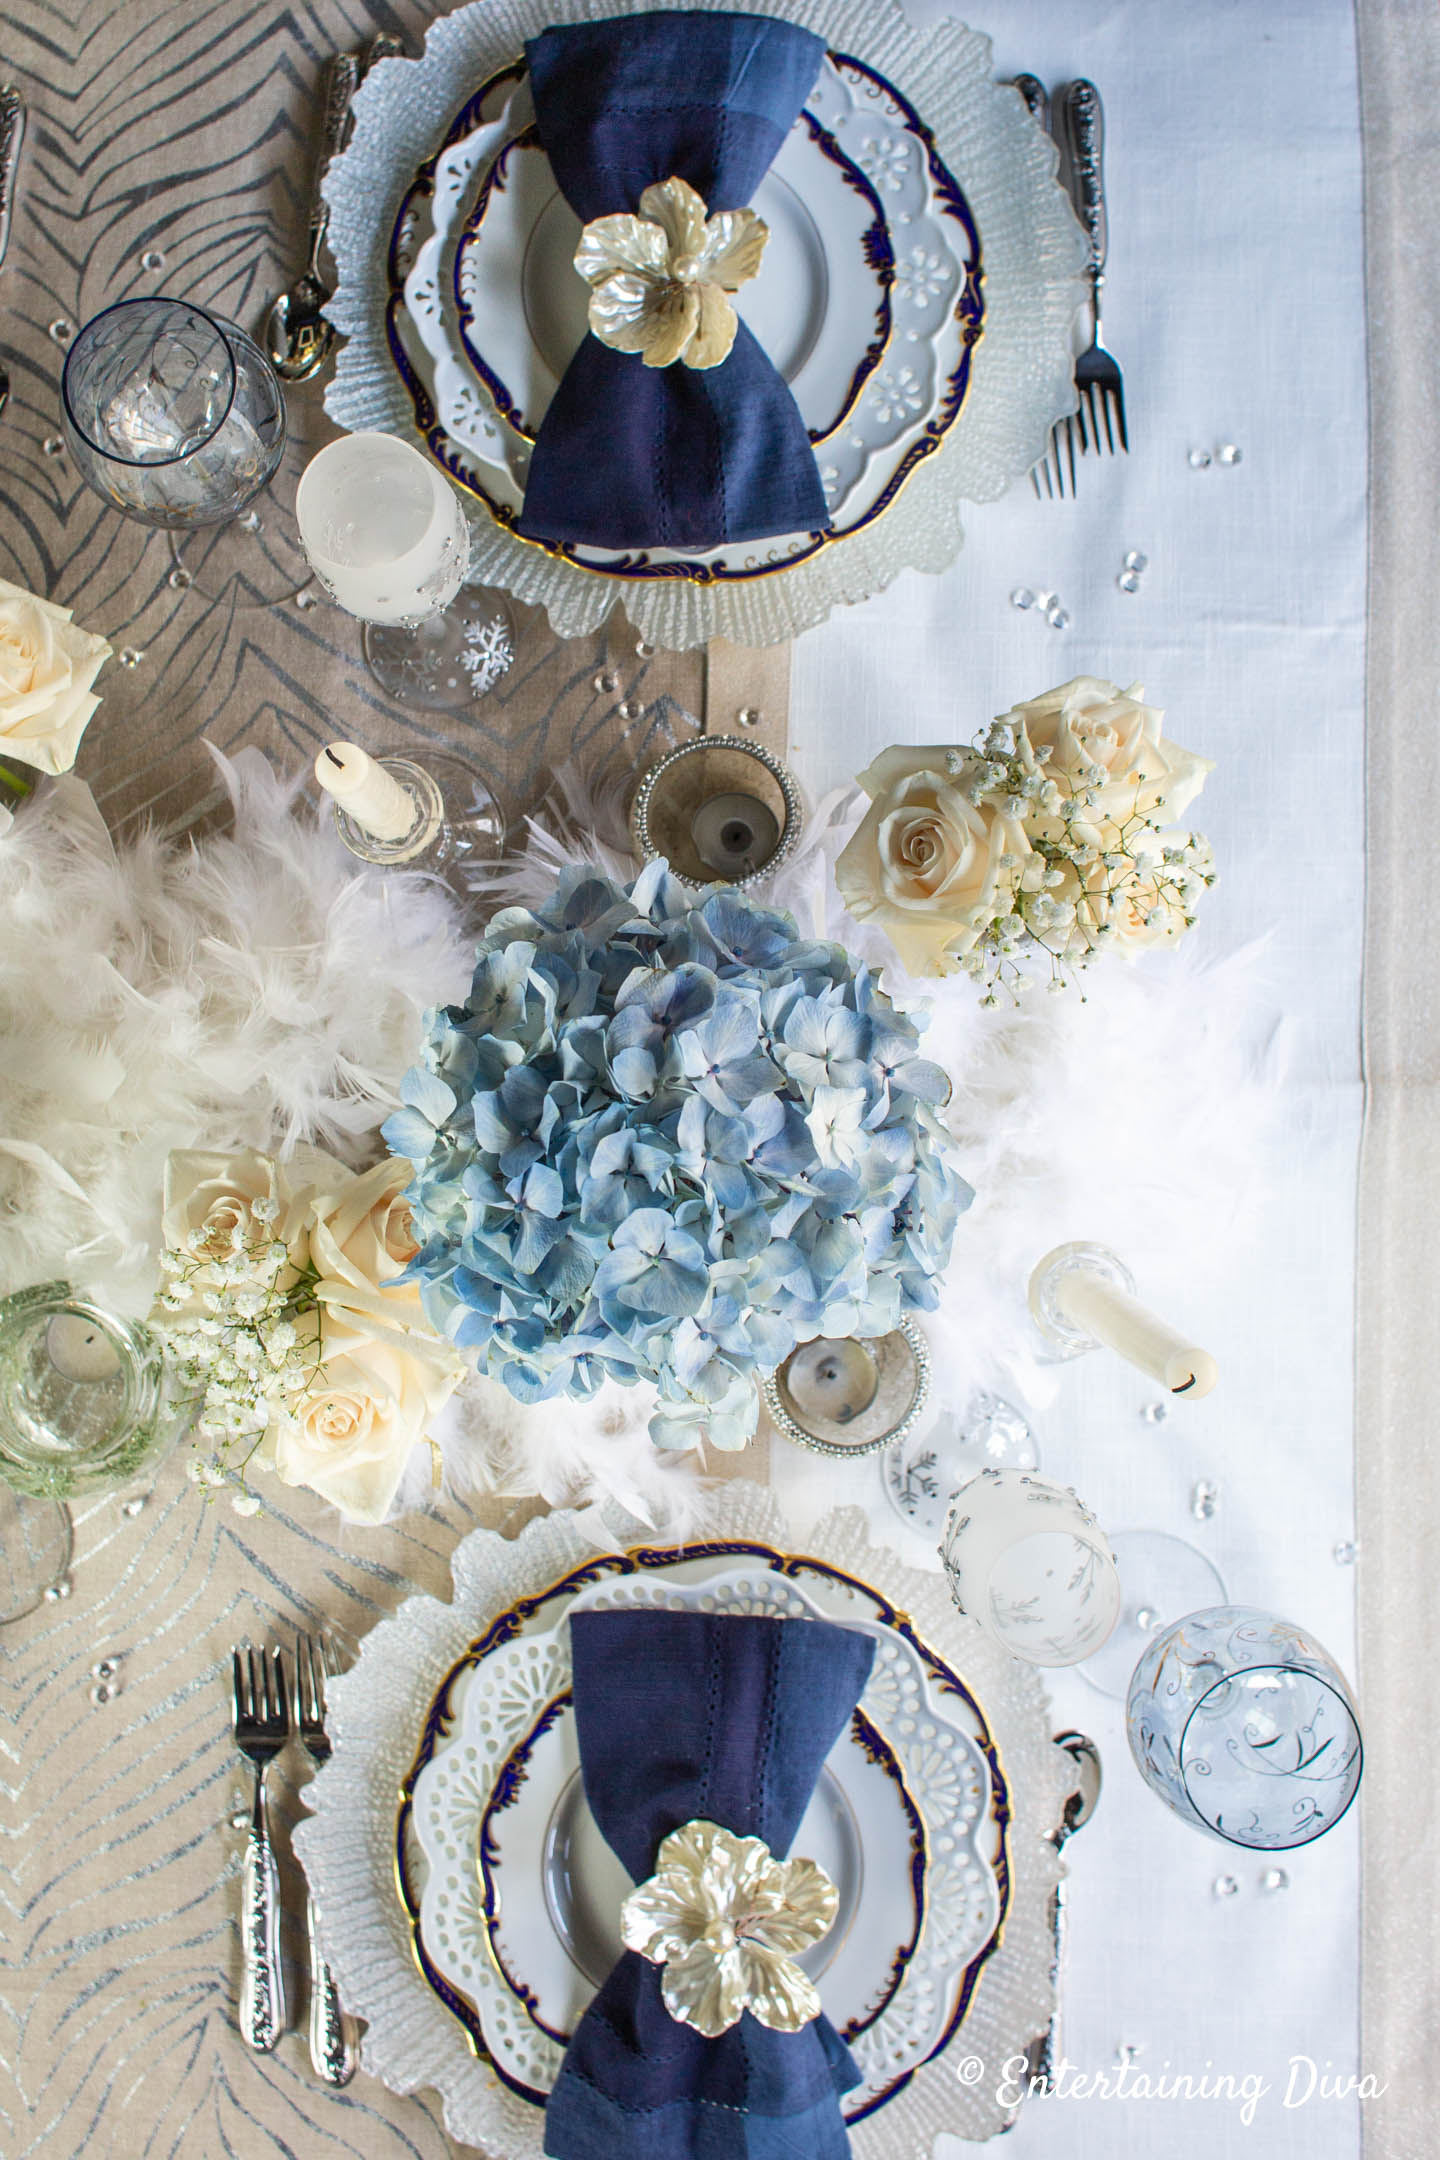 Winter wonderland table decor with place settings and flowers